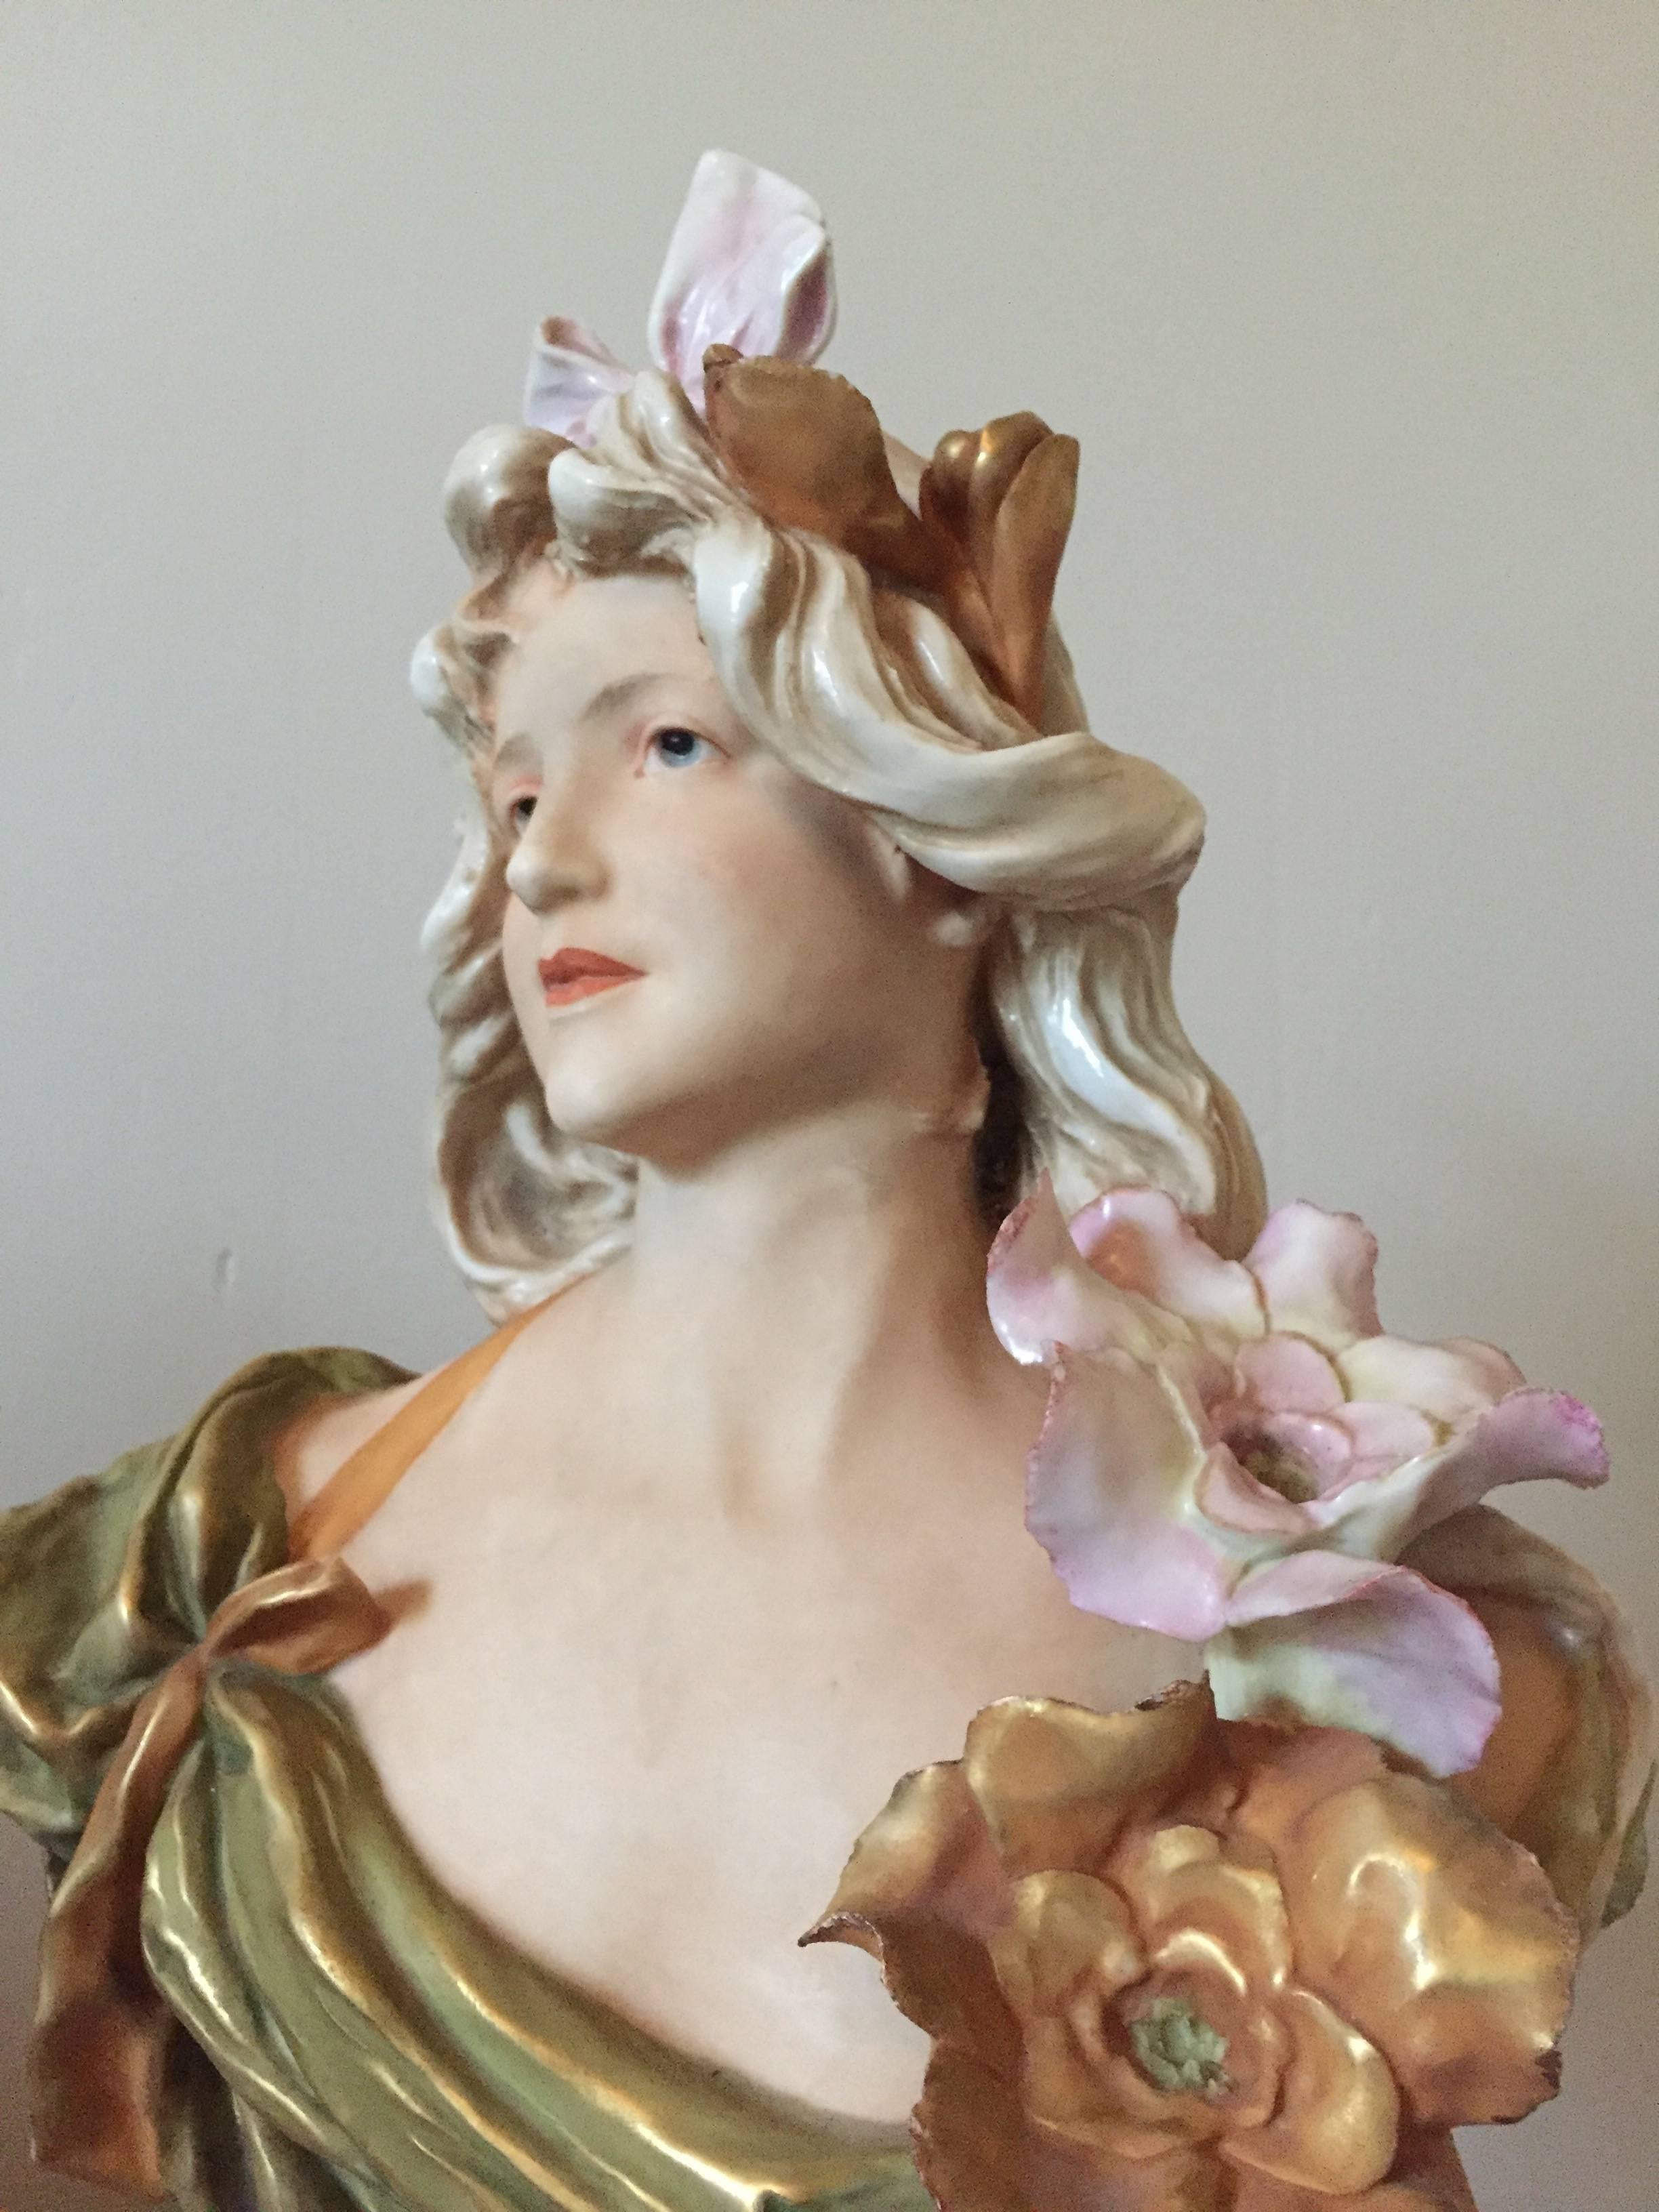 This beautiful Art Nouveau bust by Royal Dux of Austria is a perfect example of the work done by this firm during the period. The bust expertly modeled with exceptional details the applied flowers, the coloration lovely and gilt highlighting to